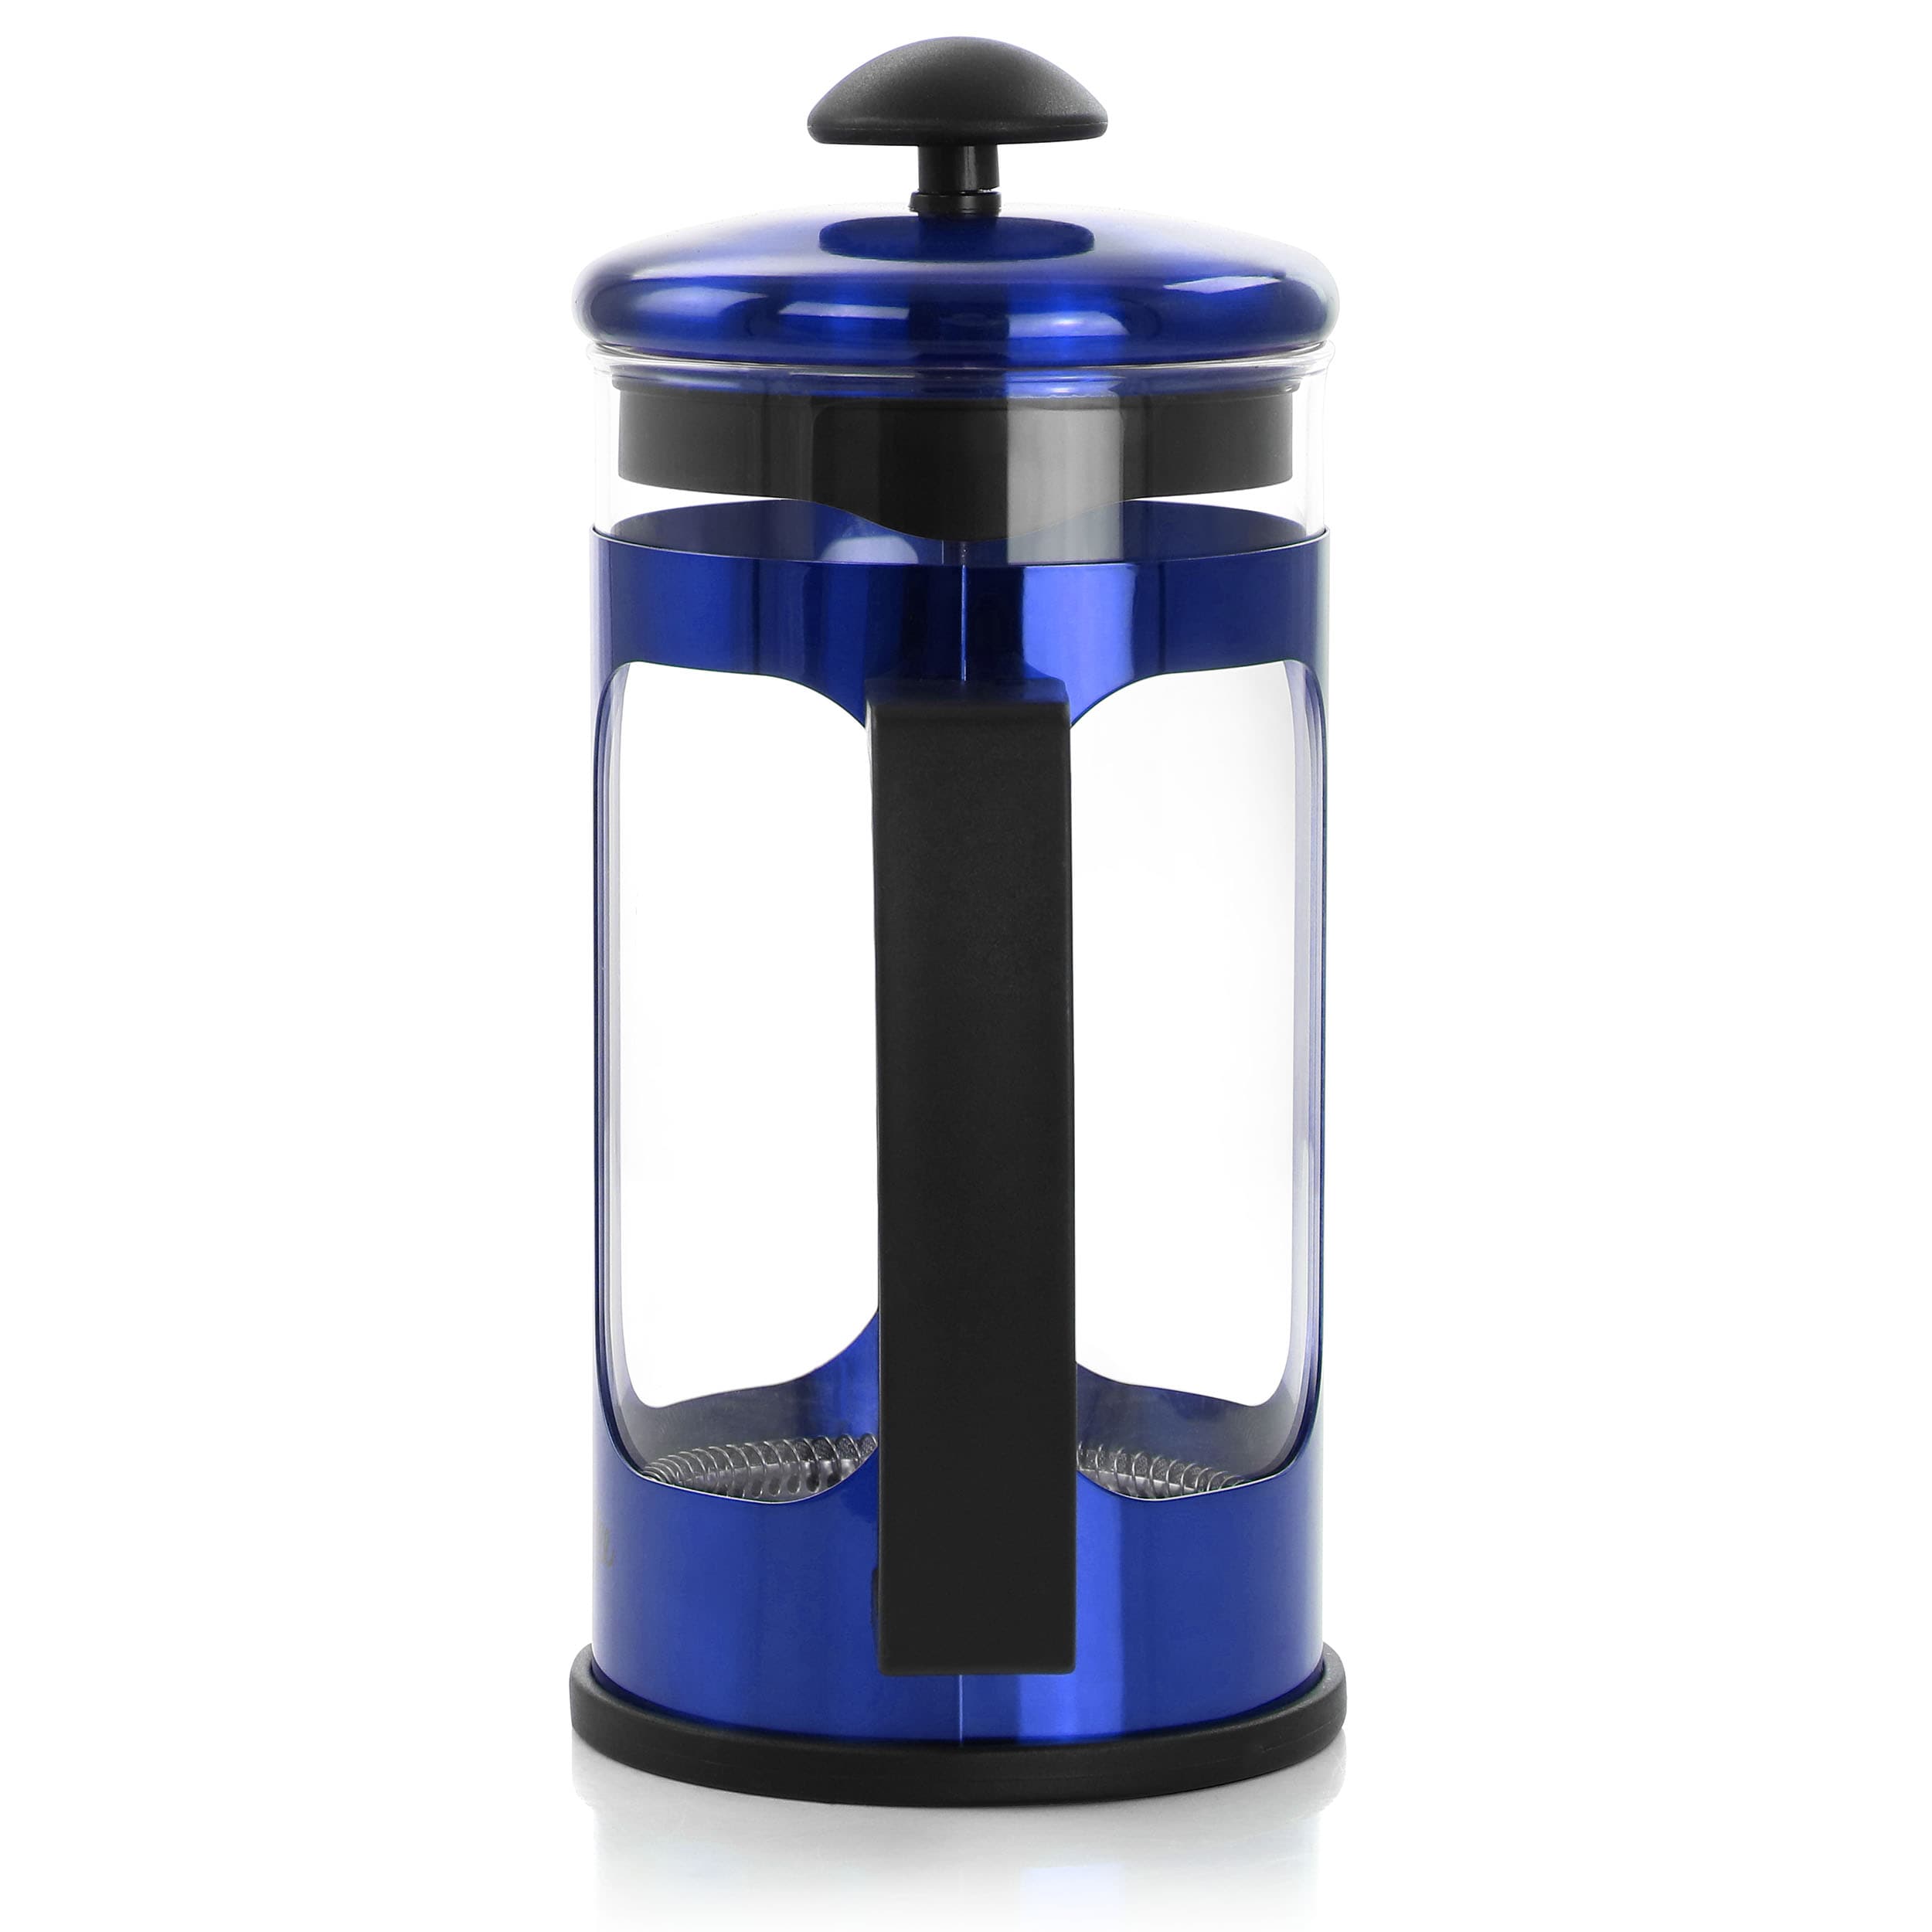 Upscale large(600ml) Coffee French Press Plunger Brewer Pot, 4 Part  Filtration, Metallic body, Borosilicate glass